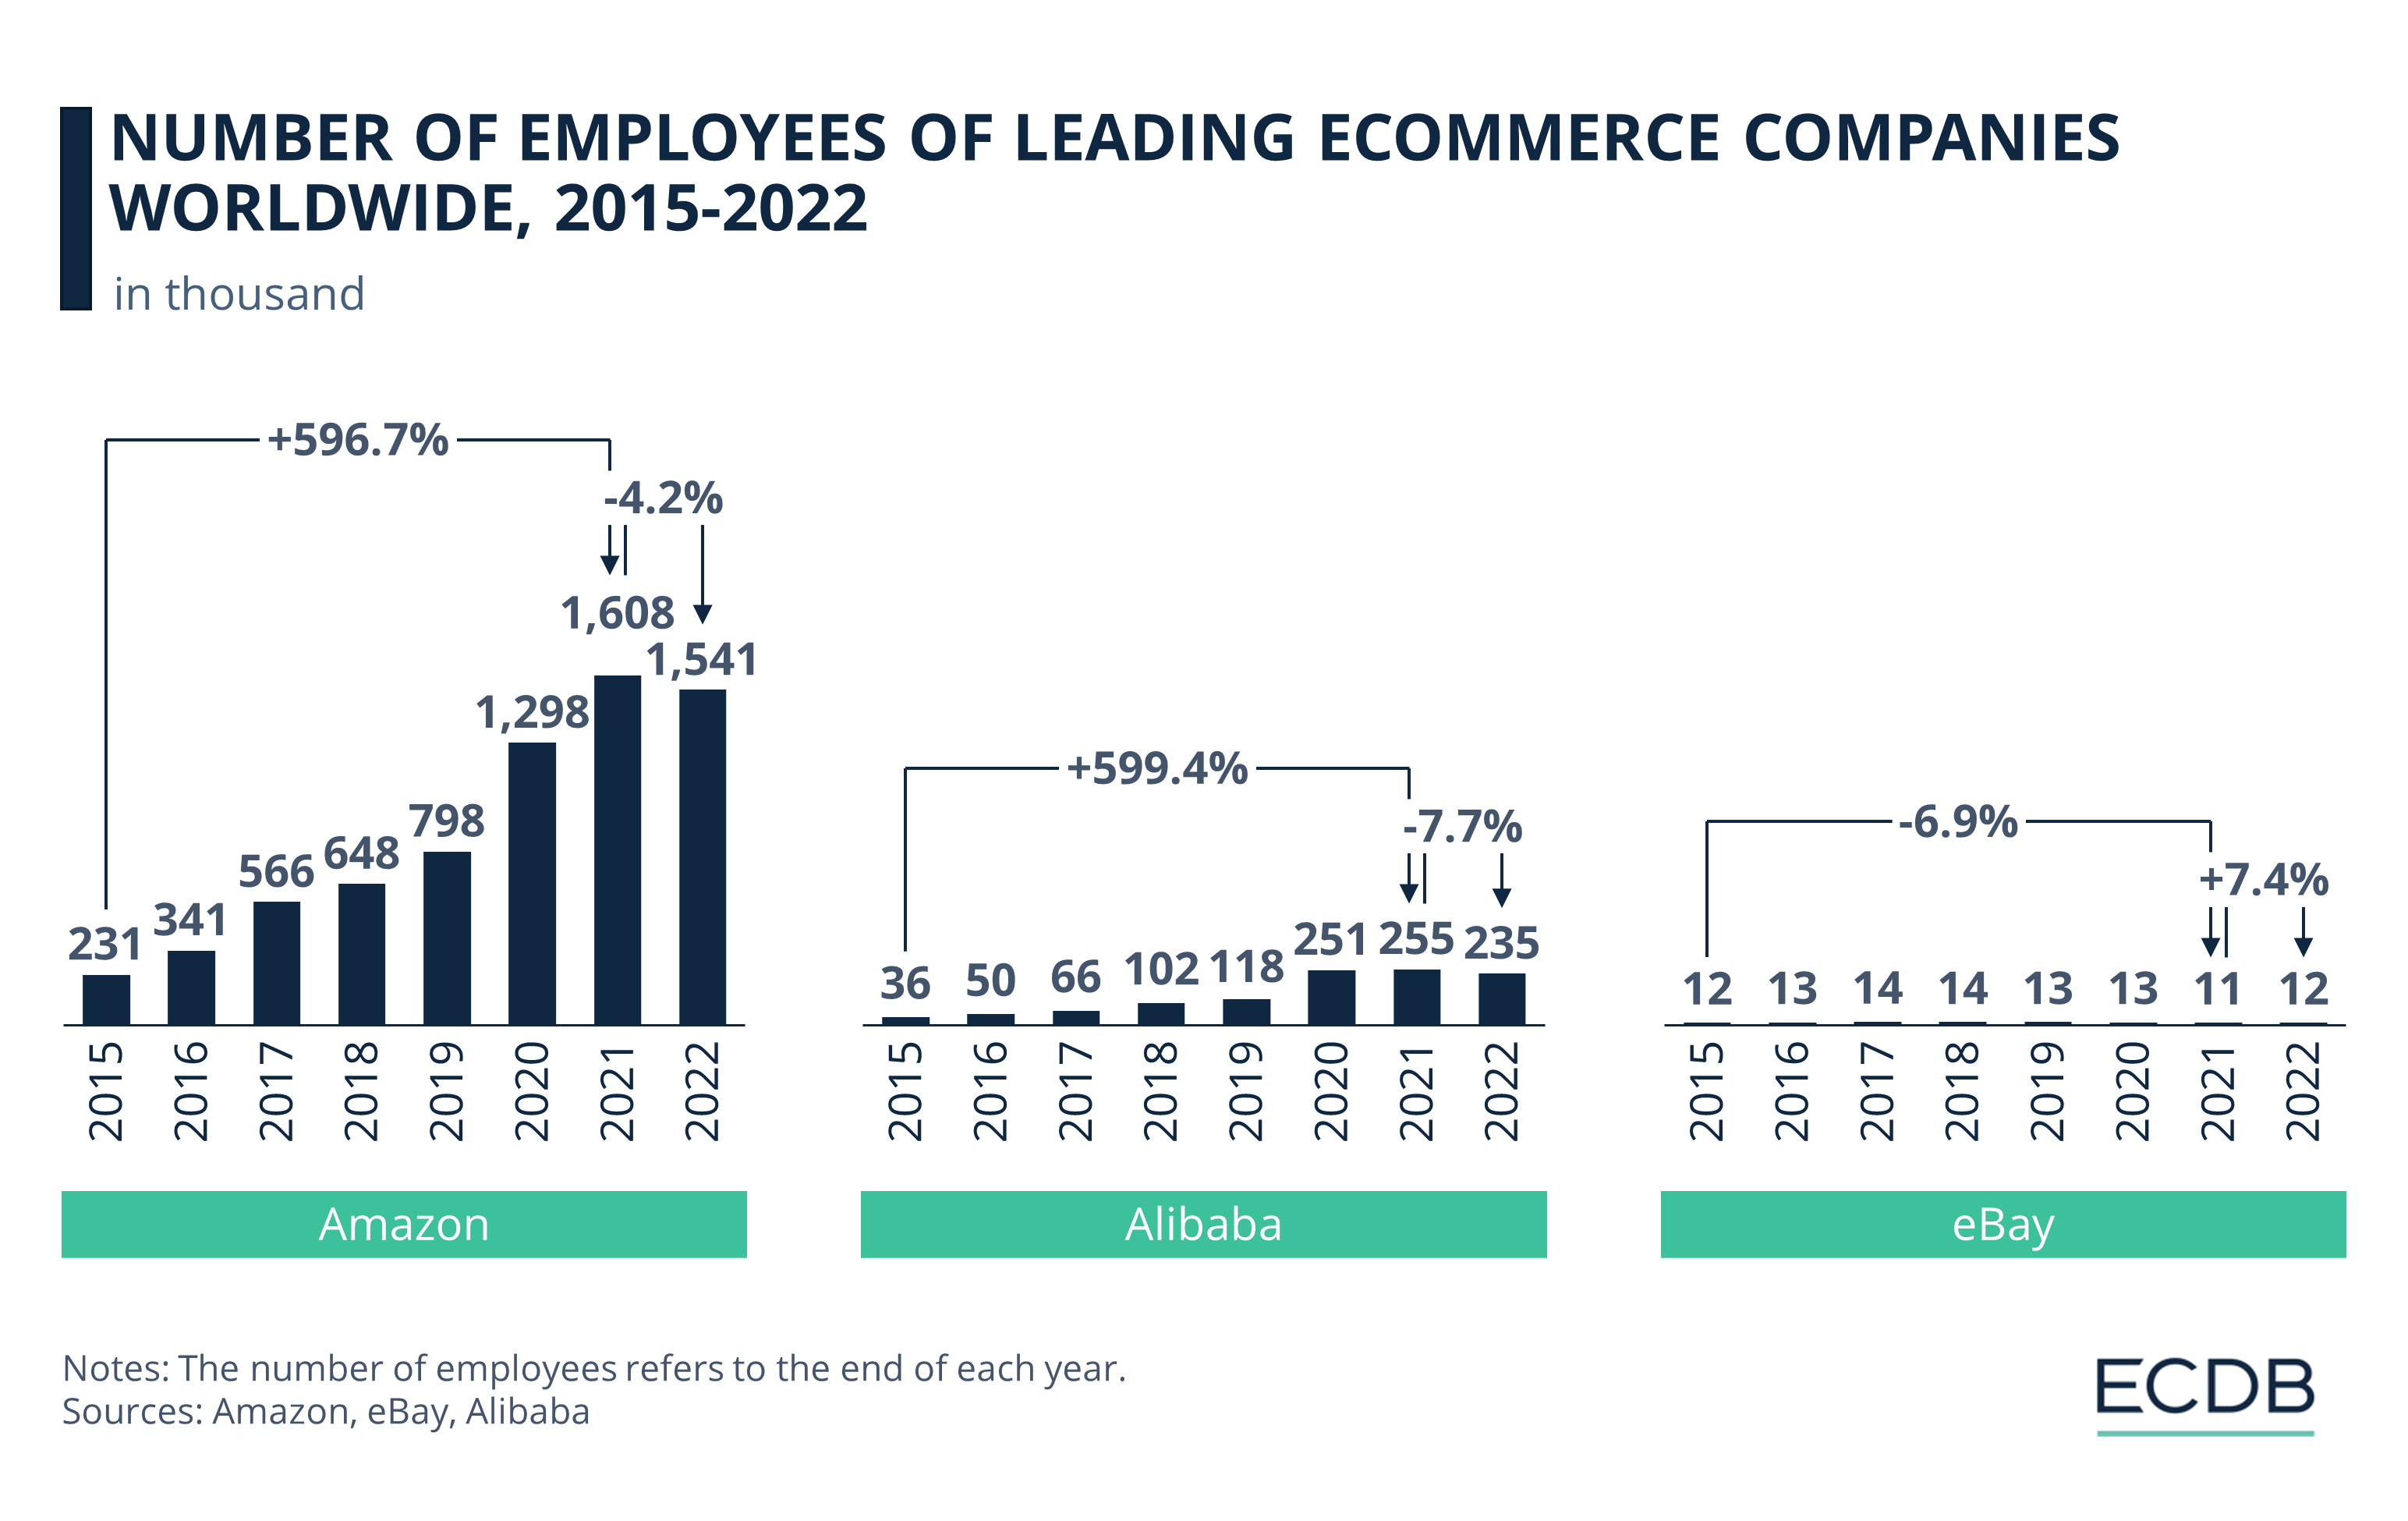 Number of Employees of Leading eCommerce Companies Worldwide, 2015-2022